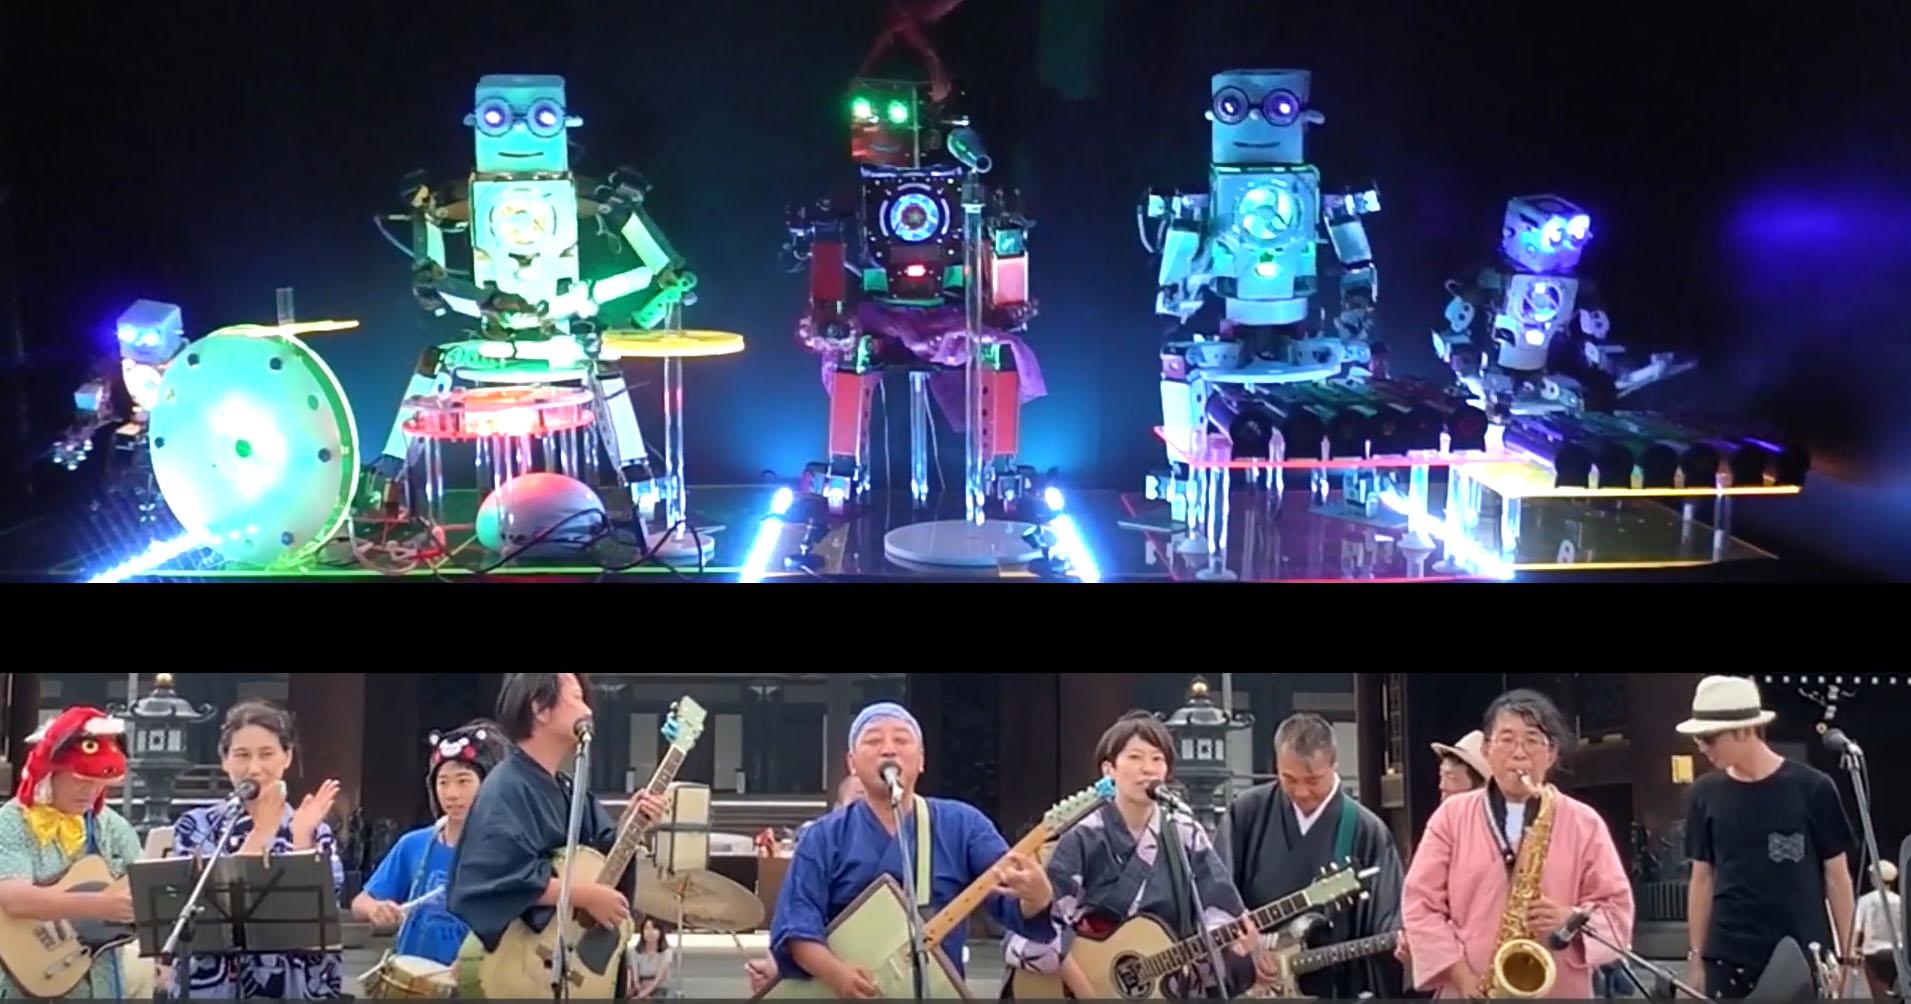 Musical Robots and Tatami Instrument